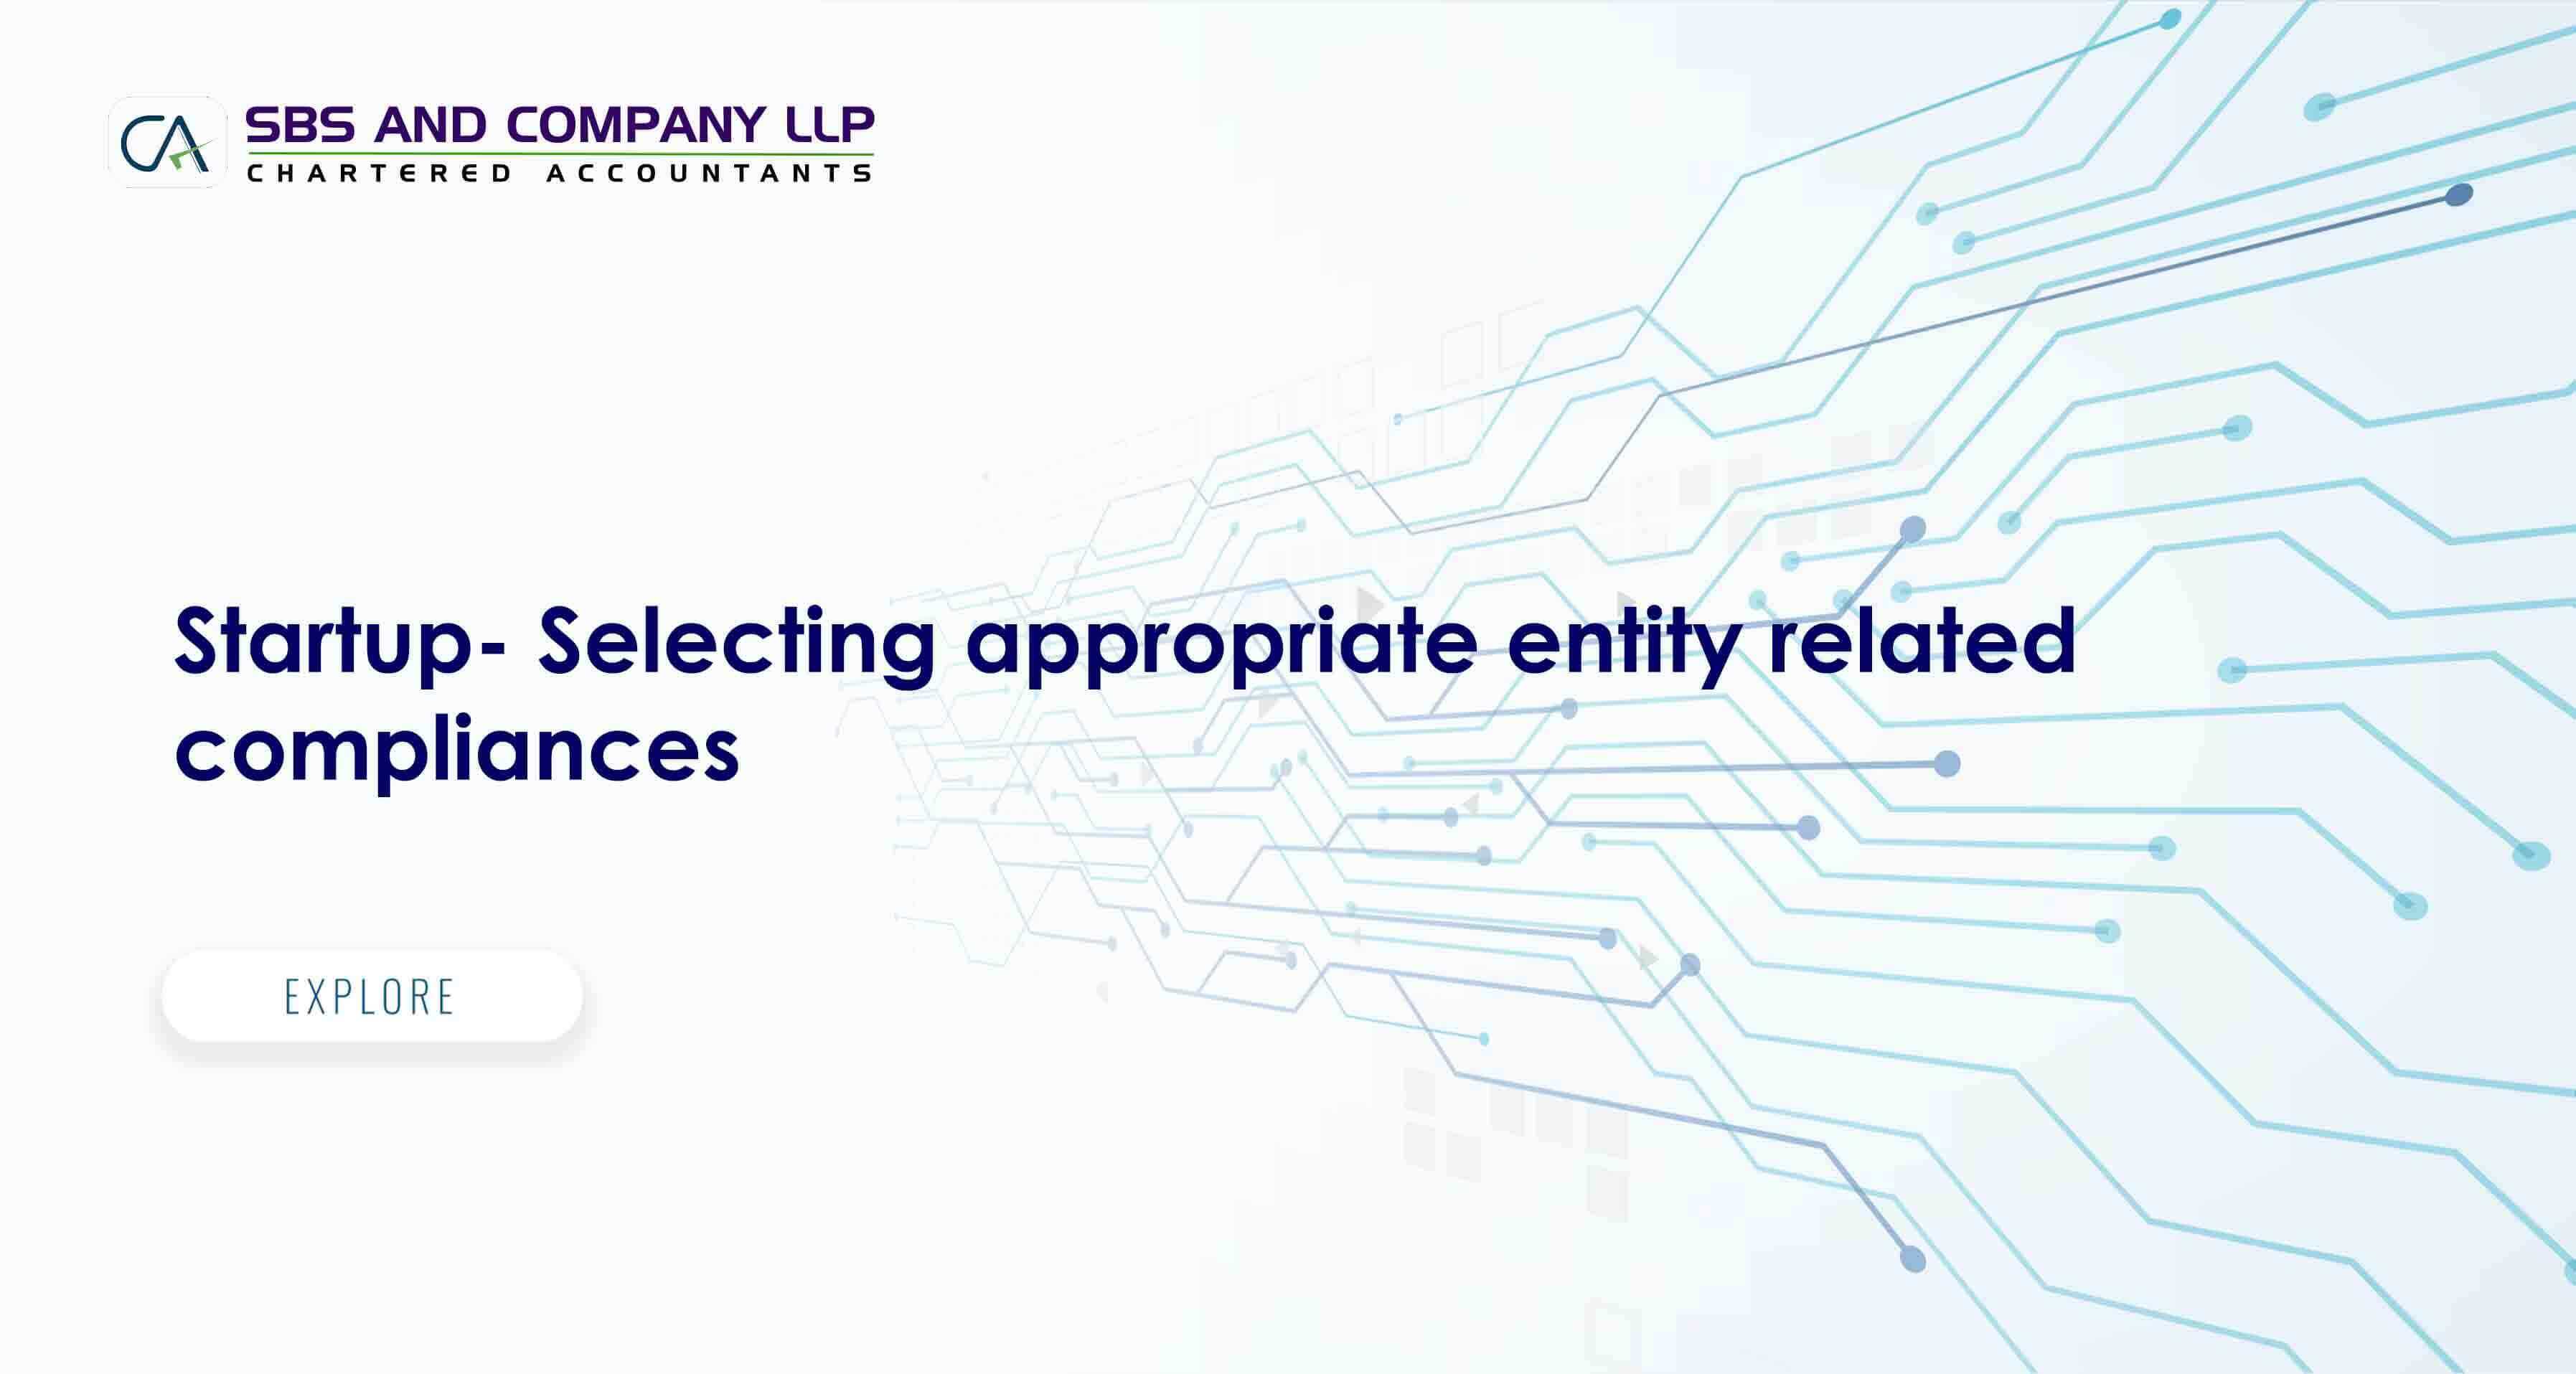 Startup- Selecting appropriate entity related compliances